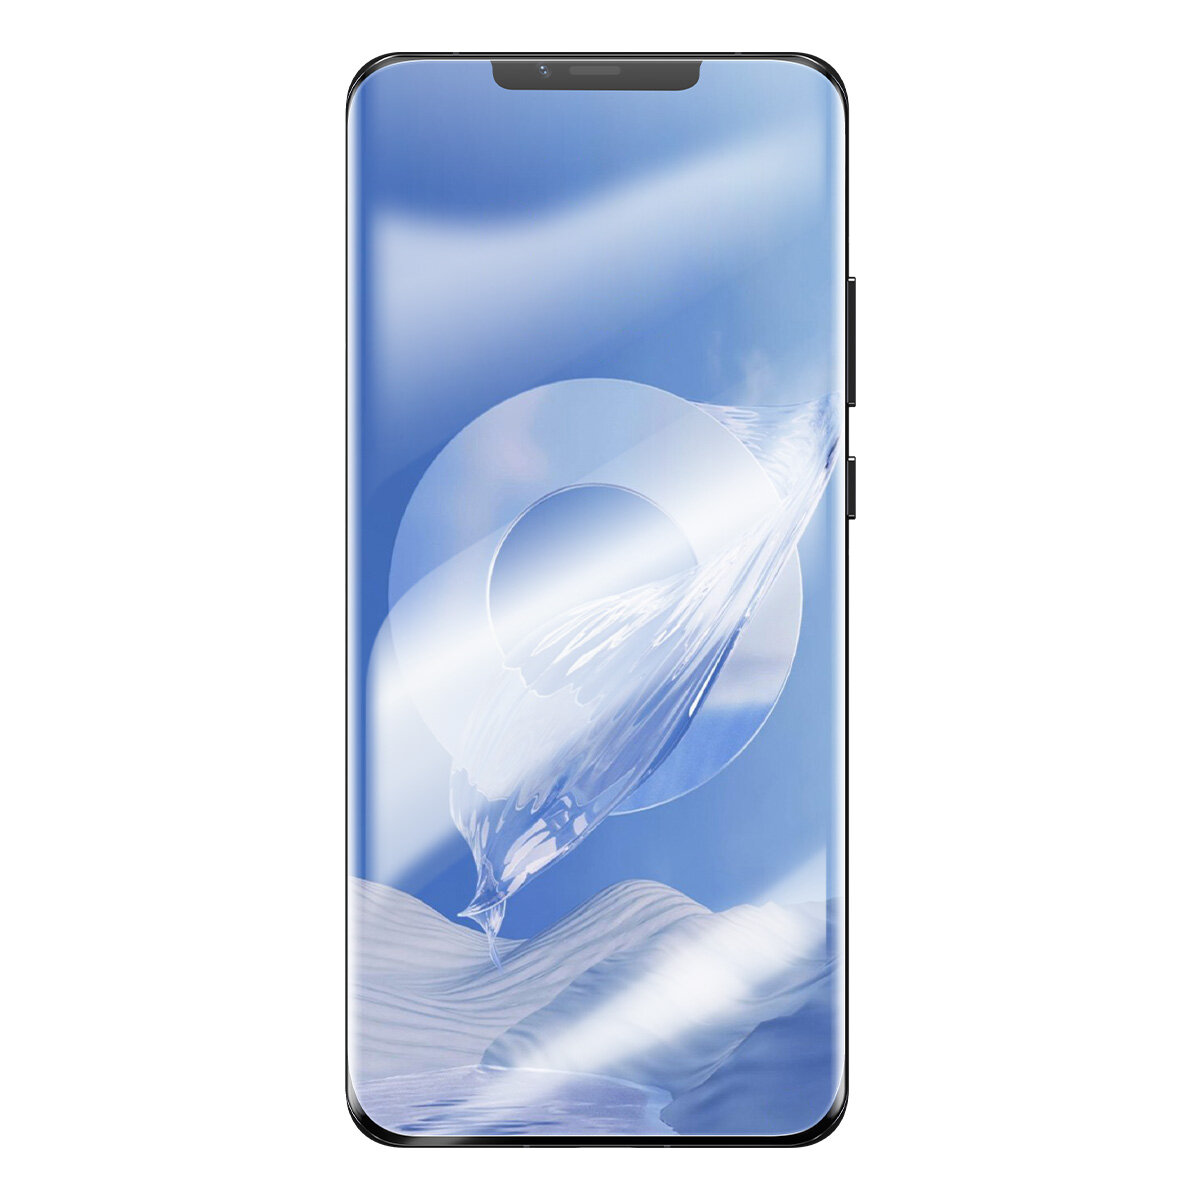 Baseus 0.15mm Full Screen Curved Suiface Anti Blue-ray Water Gel Protector Film for Huawei Mate 50 Pro/50RS; Huawei Mate